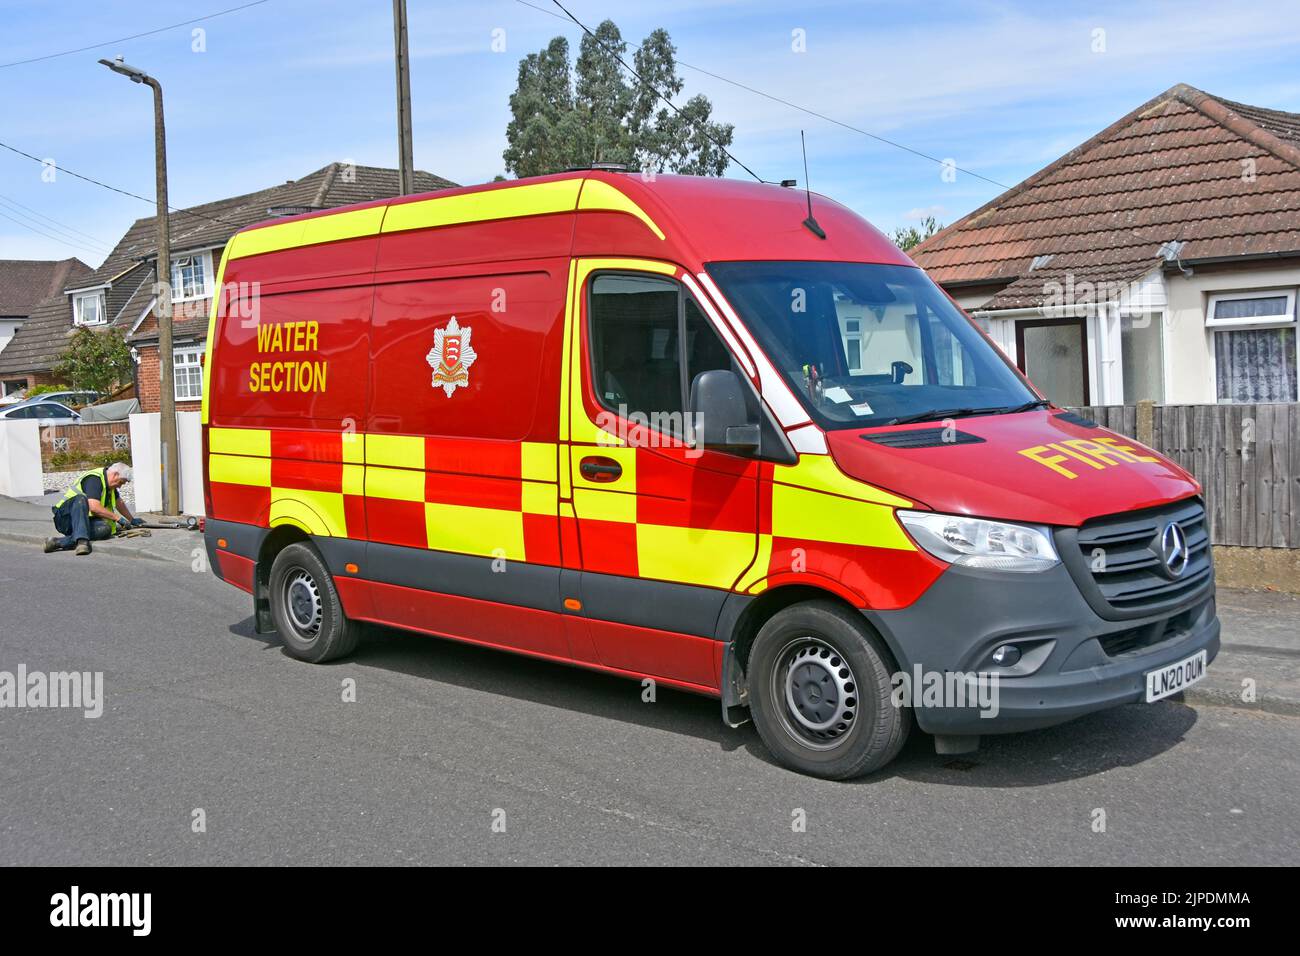 Fire brigade van driver laying on pavement removing stuck cover underground street fire hydrant Essex Fire and Rescue Service Water Section England UK Stock Photo